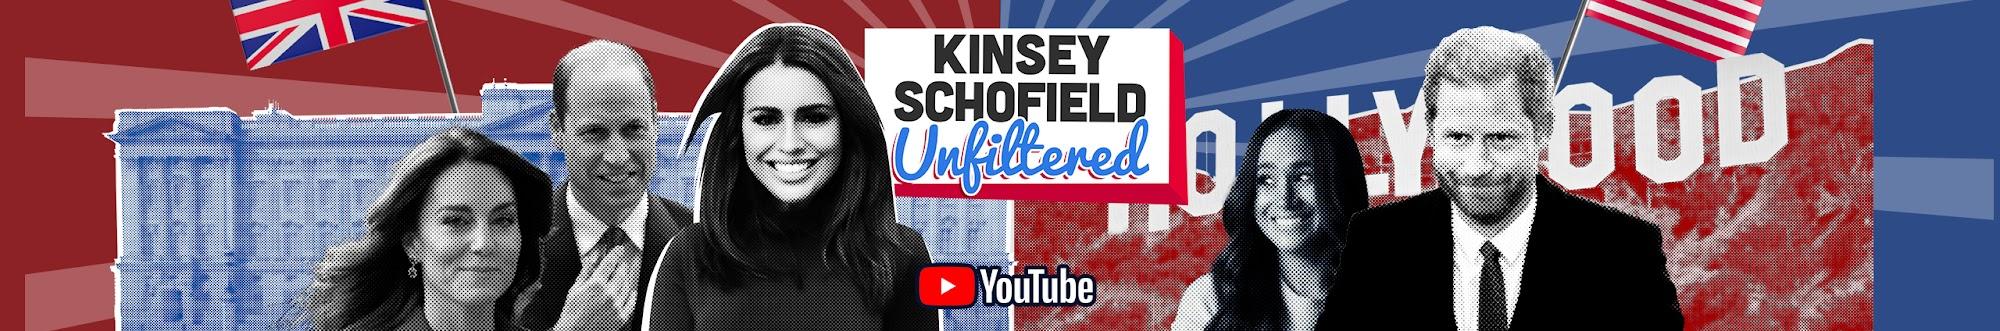 Kinsey Schofield Unfiltered